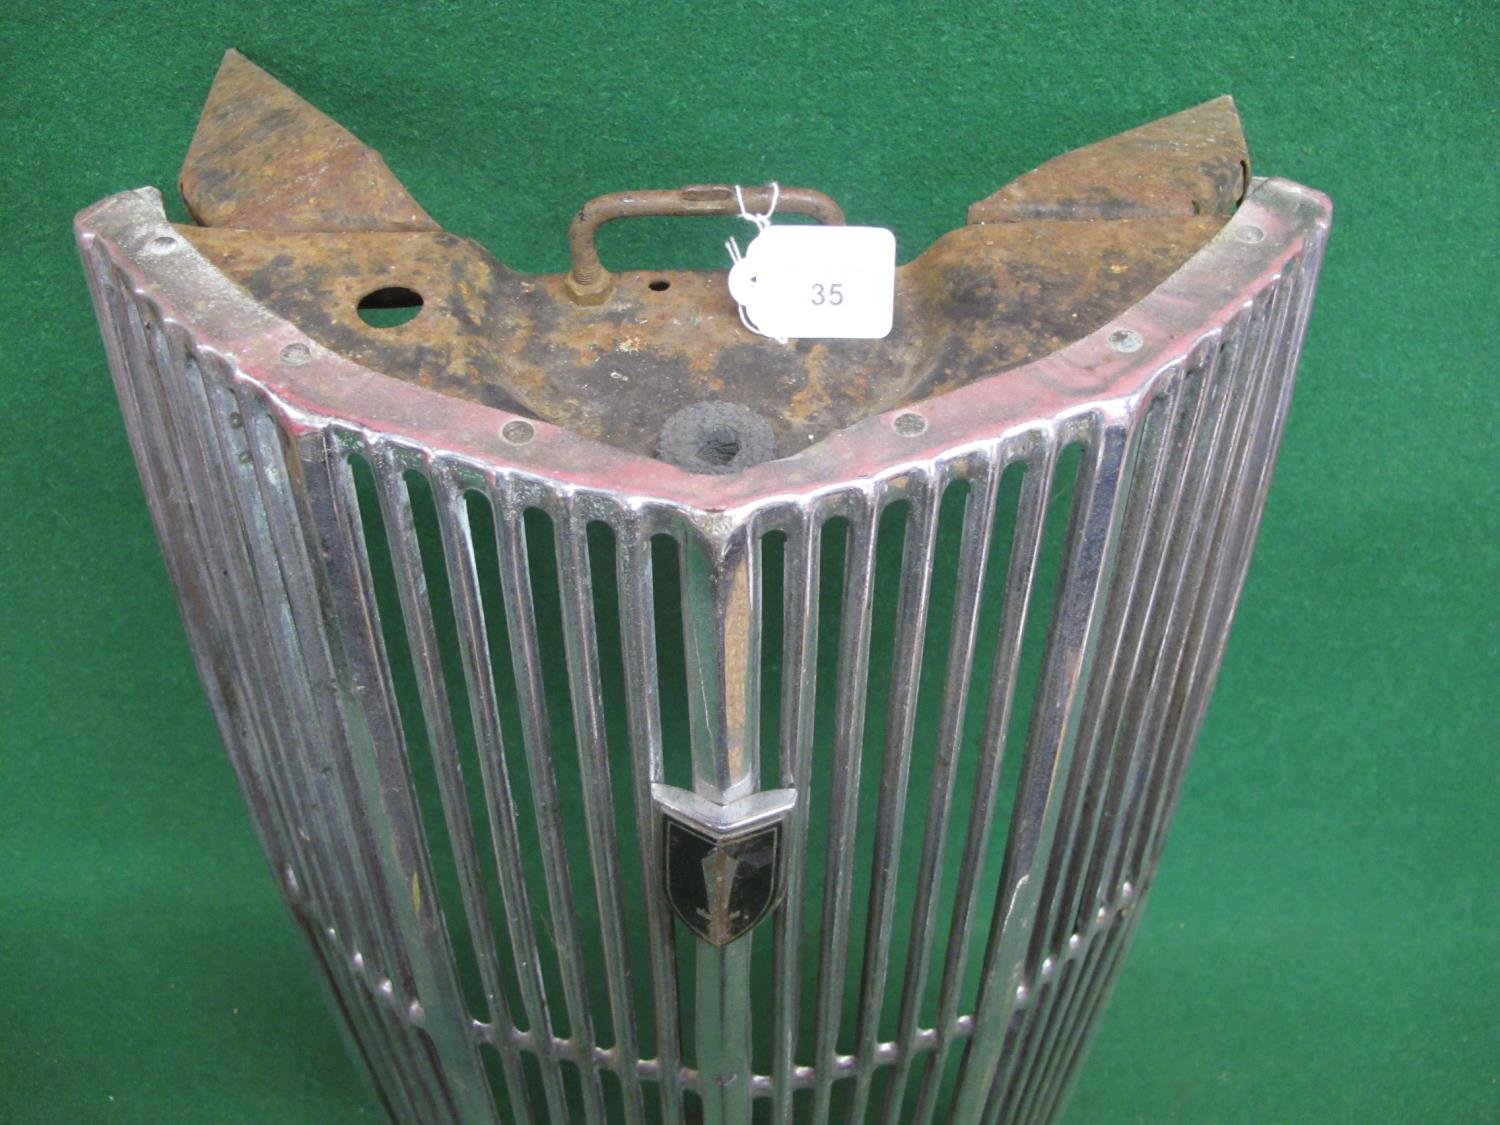 Vertical chromed radiator grill with starting handle hole and badge - 26" tall Please note - Image 2 of 3